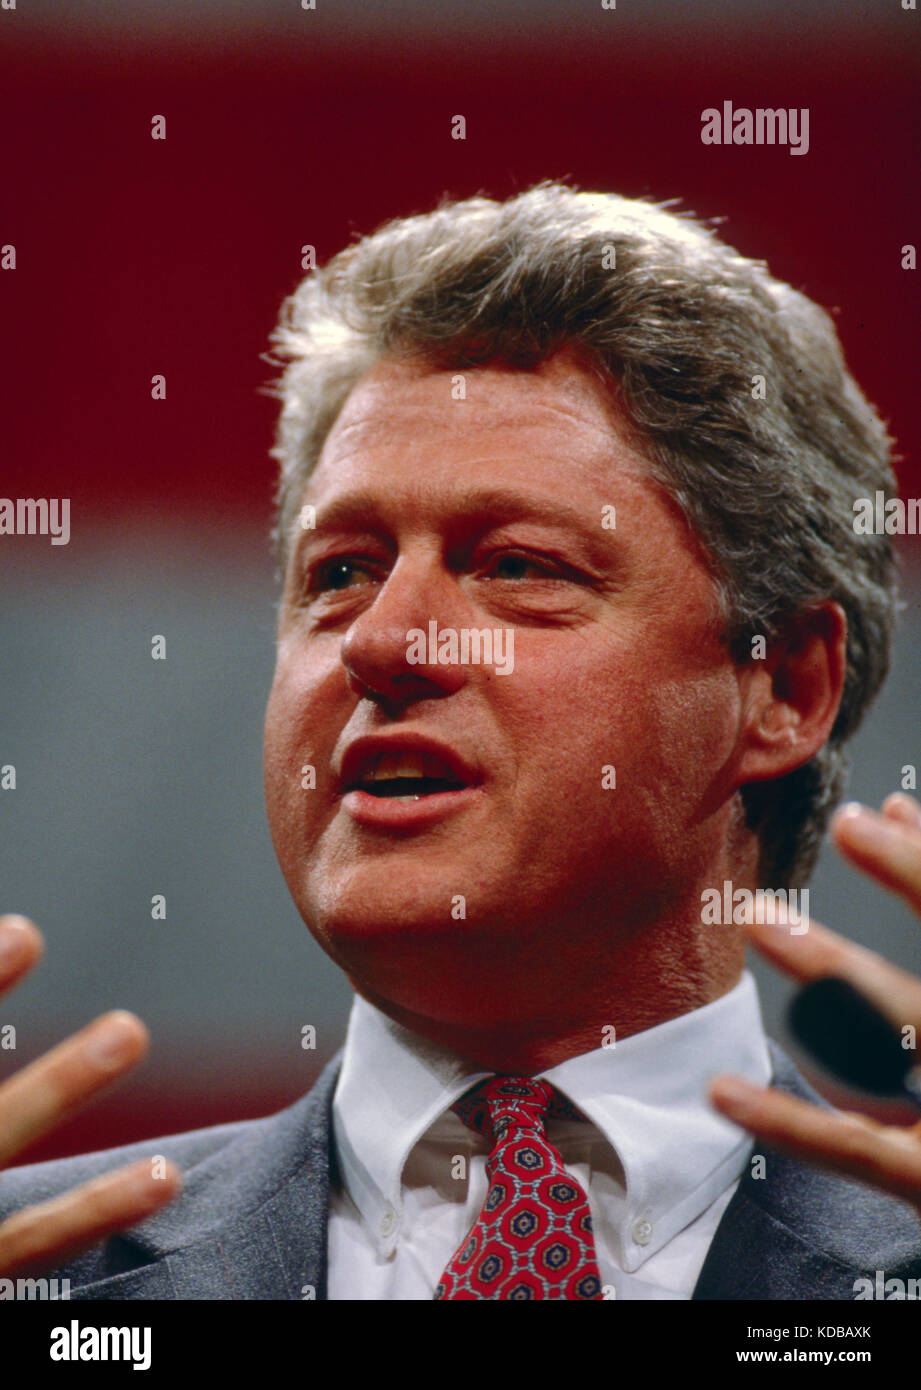 President Bill Clinton while speaking. A large American flag hangs behind him. Stock Photo